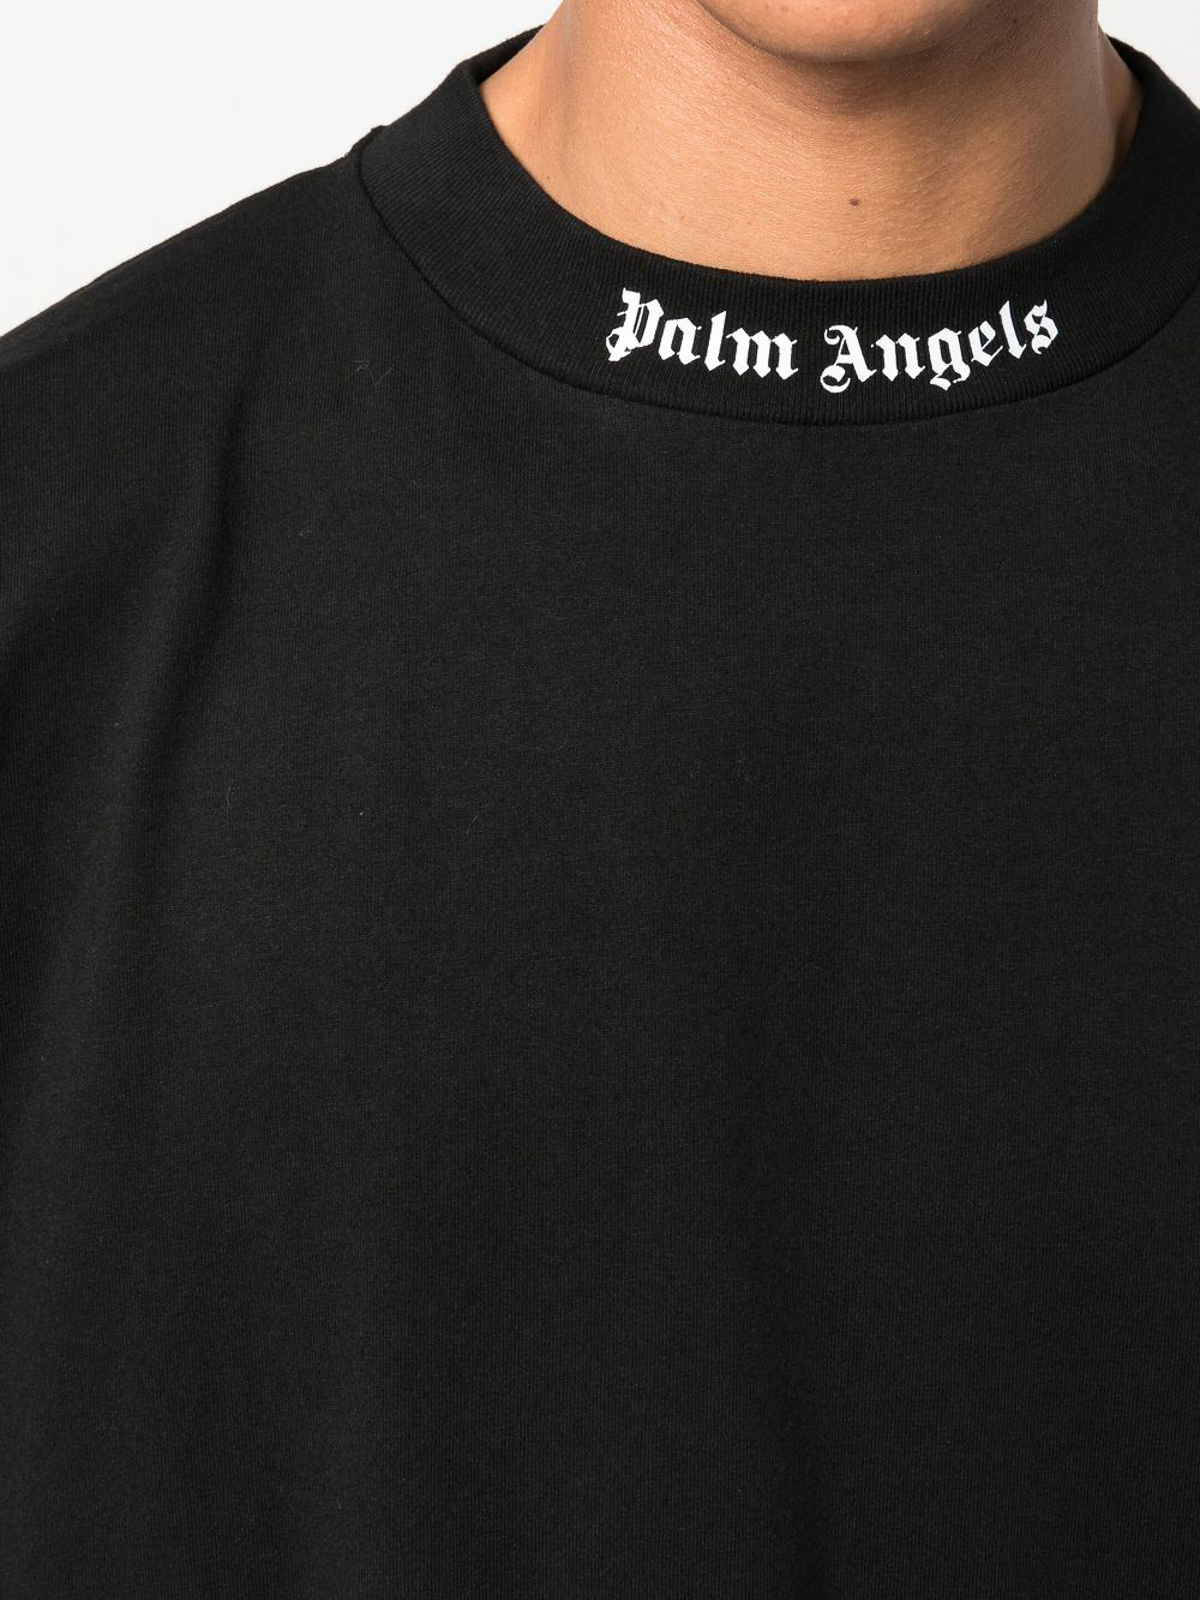 T-shirts Palm Angels - Cotton tee - PMAA002C99JER0061001